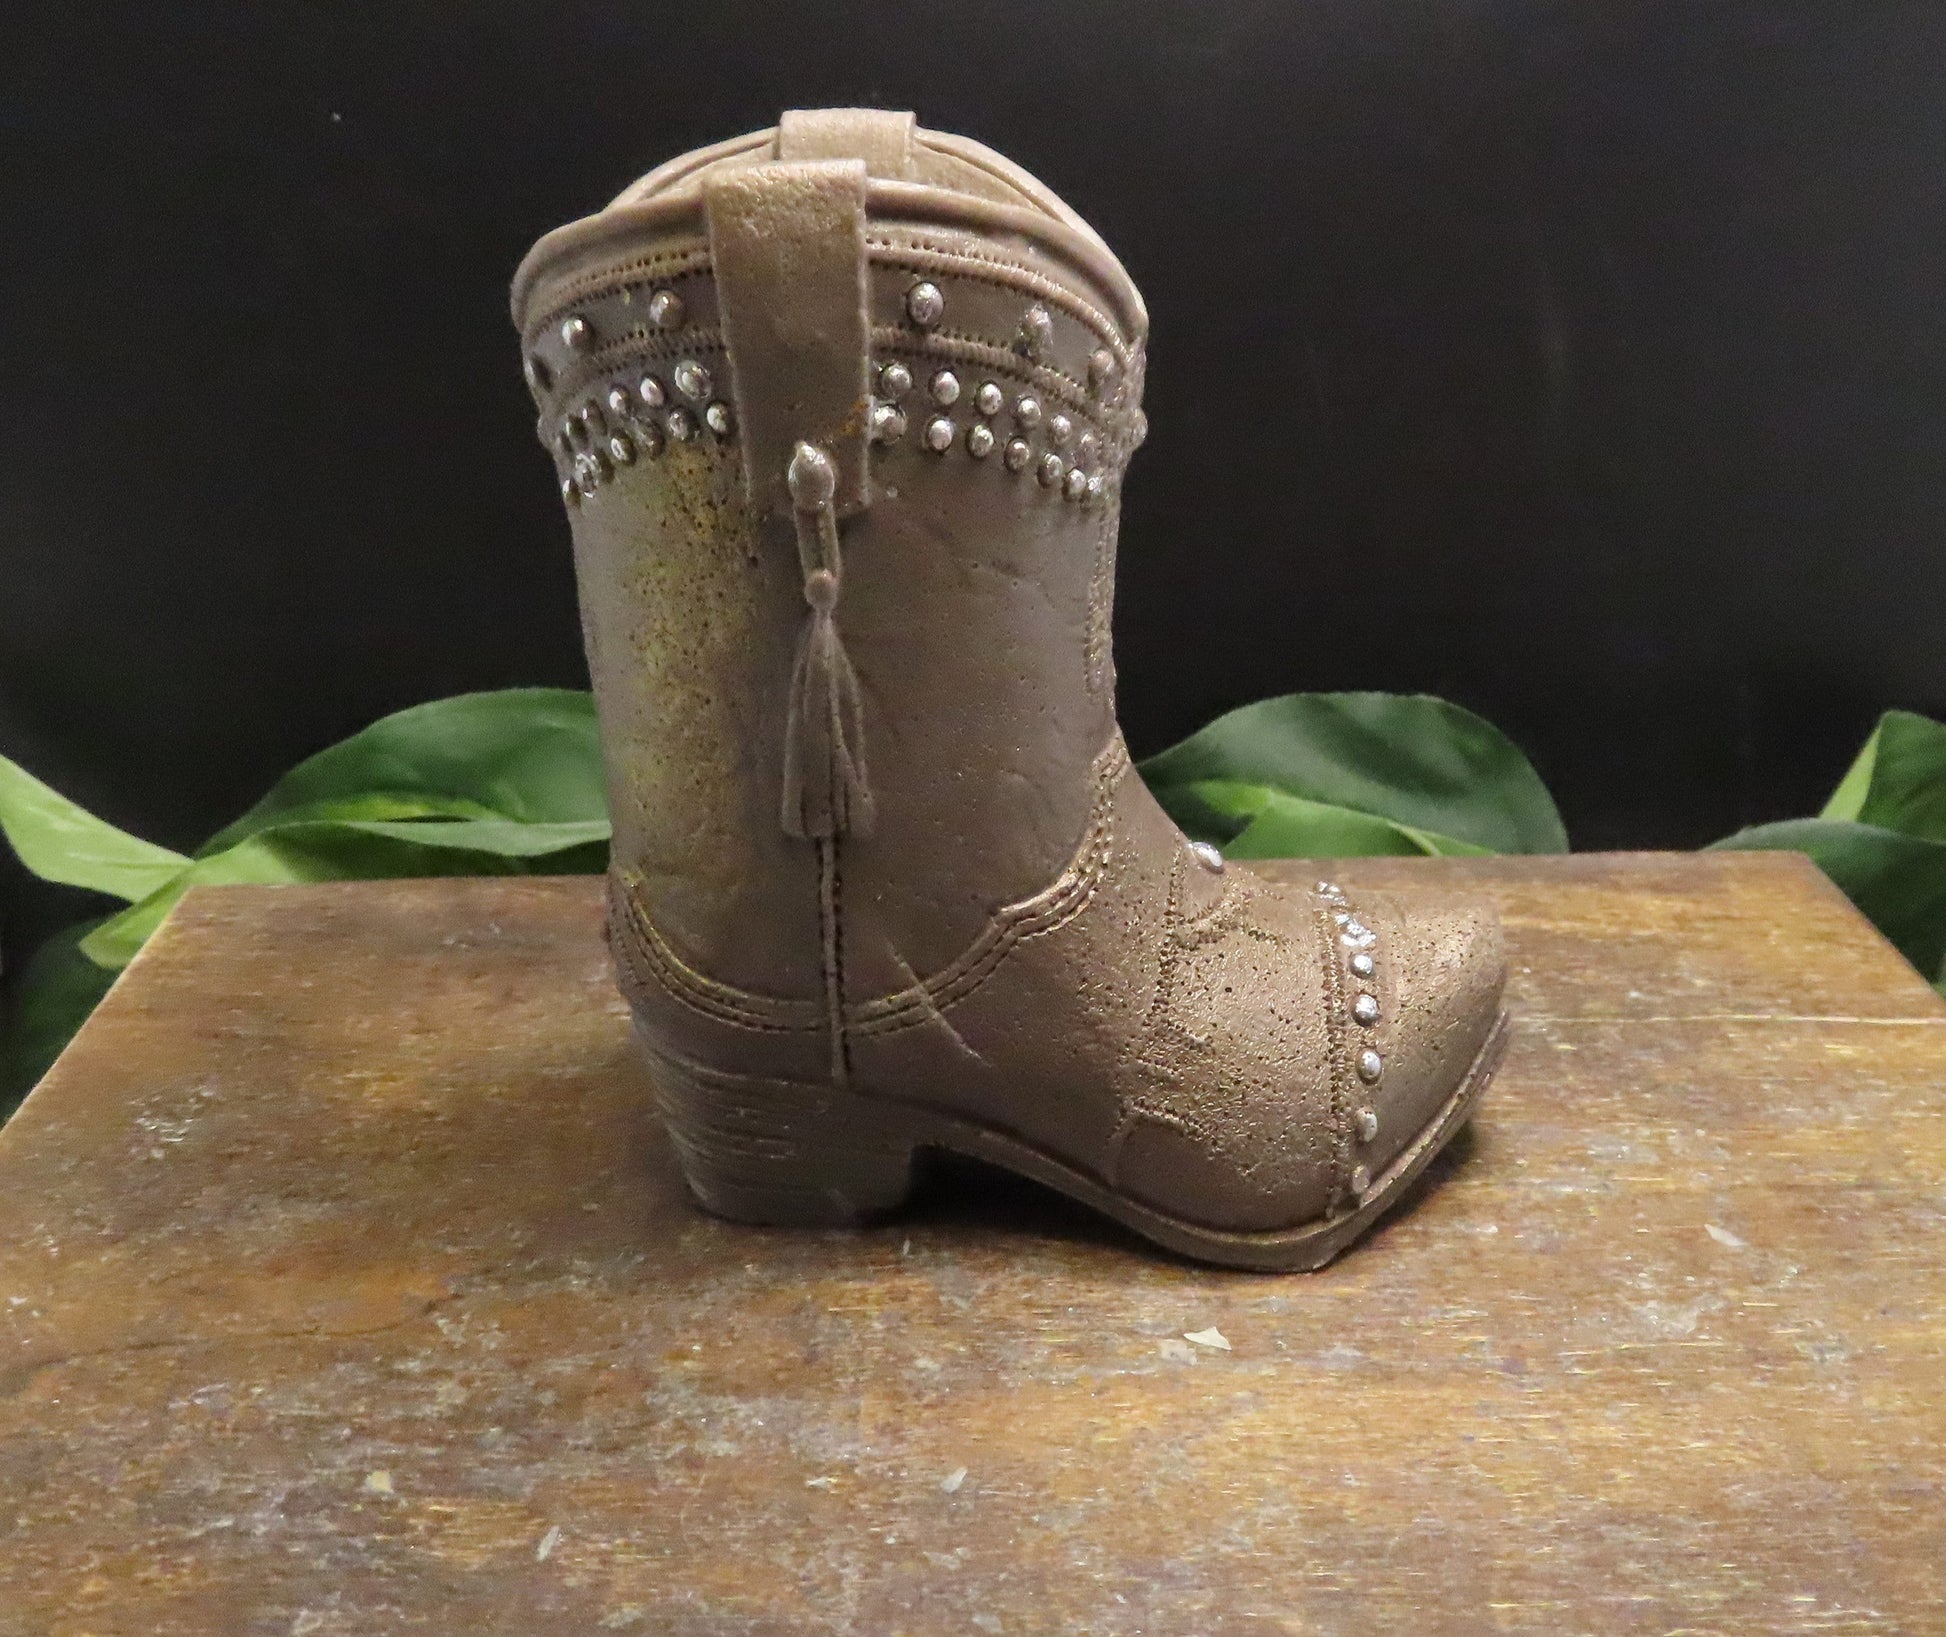 Handmade goat milk soap cowboy boot, brown with silver fittings. 